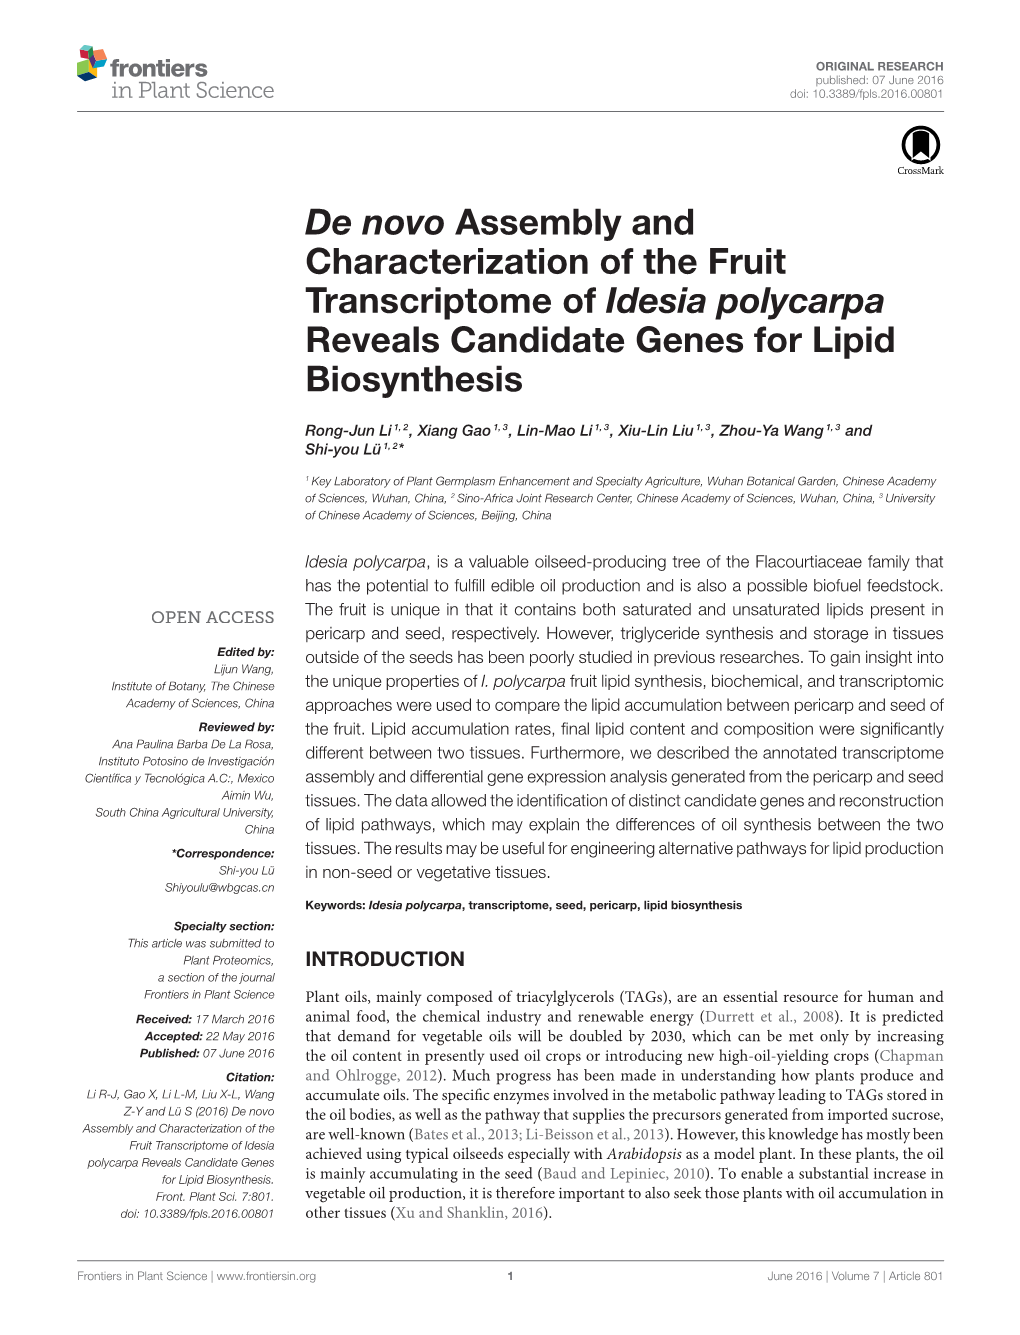 De Novo Assembly and Characterization of the Fruit Transcriptome of Idesia Polycarpa Reveals Candidate Genes for Lipid Biosynthesis